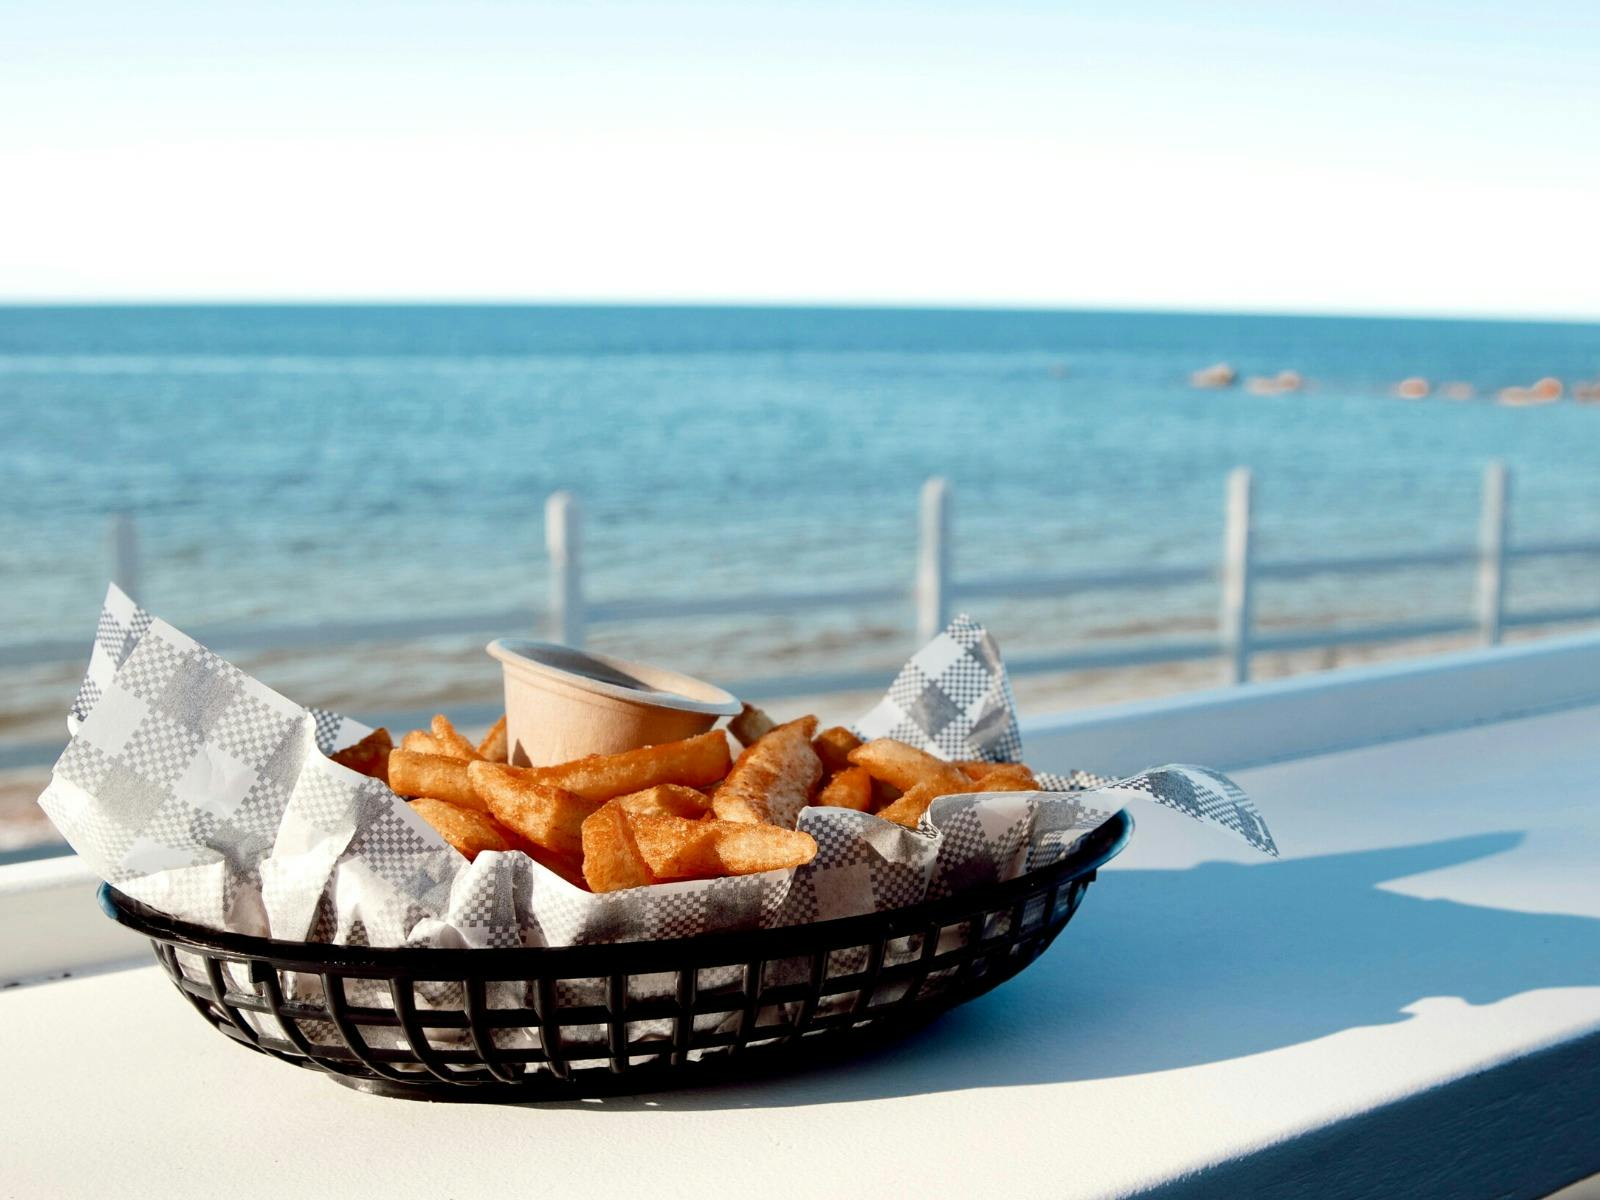 Food with an ocean view